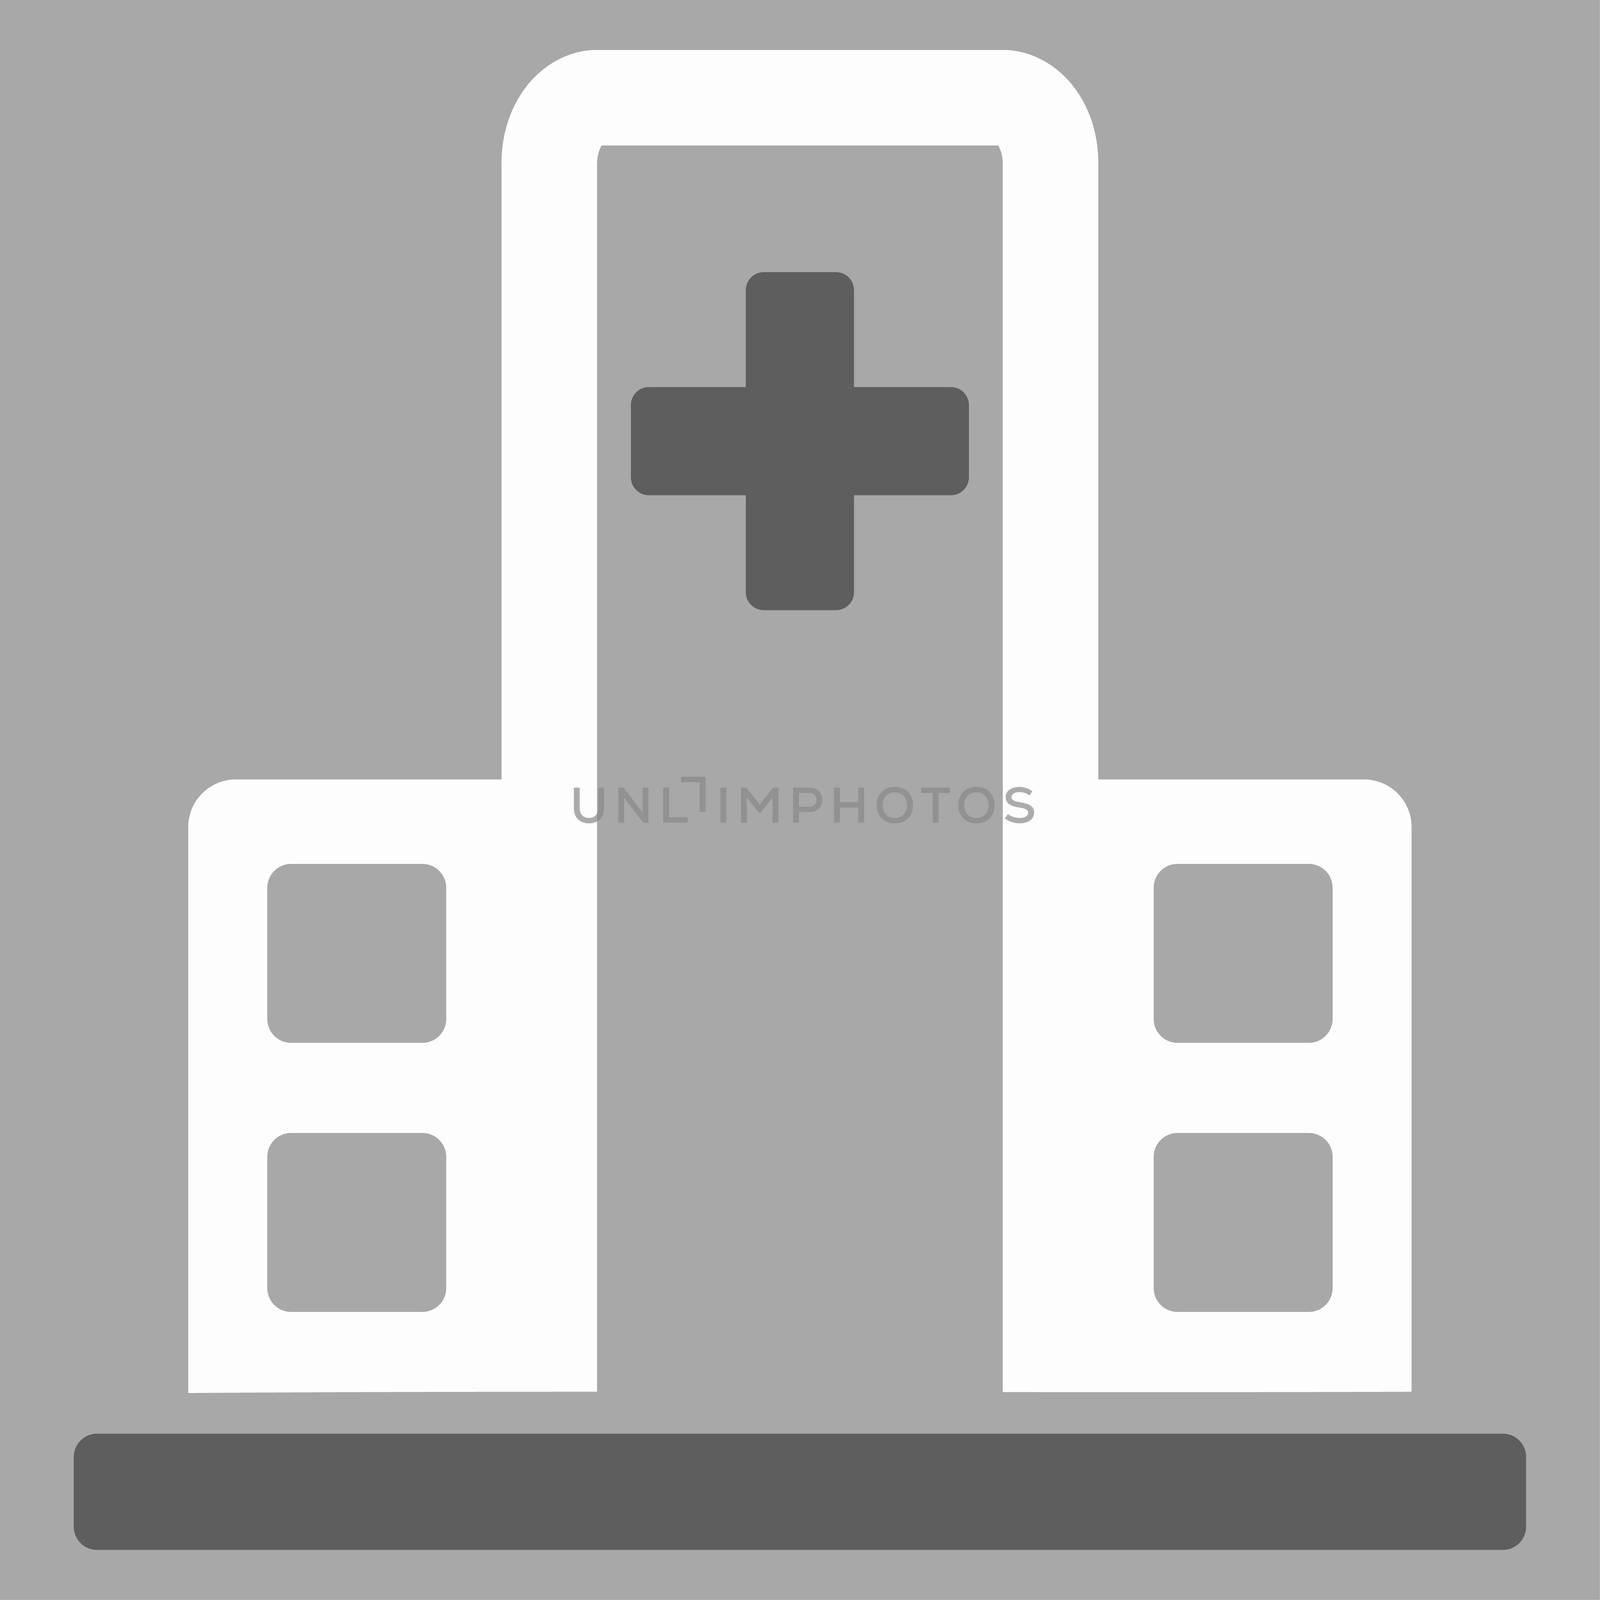 Hospital Building raster icon. Style is bicolor flat symbol, dark gray and white colors, rounded angles, silver background.